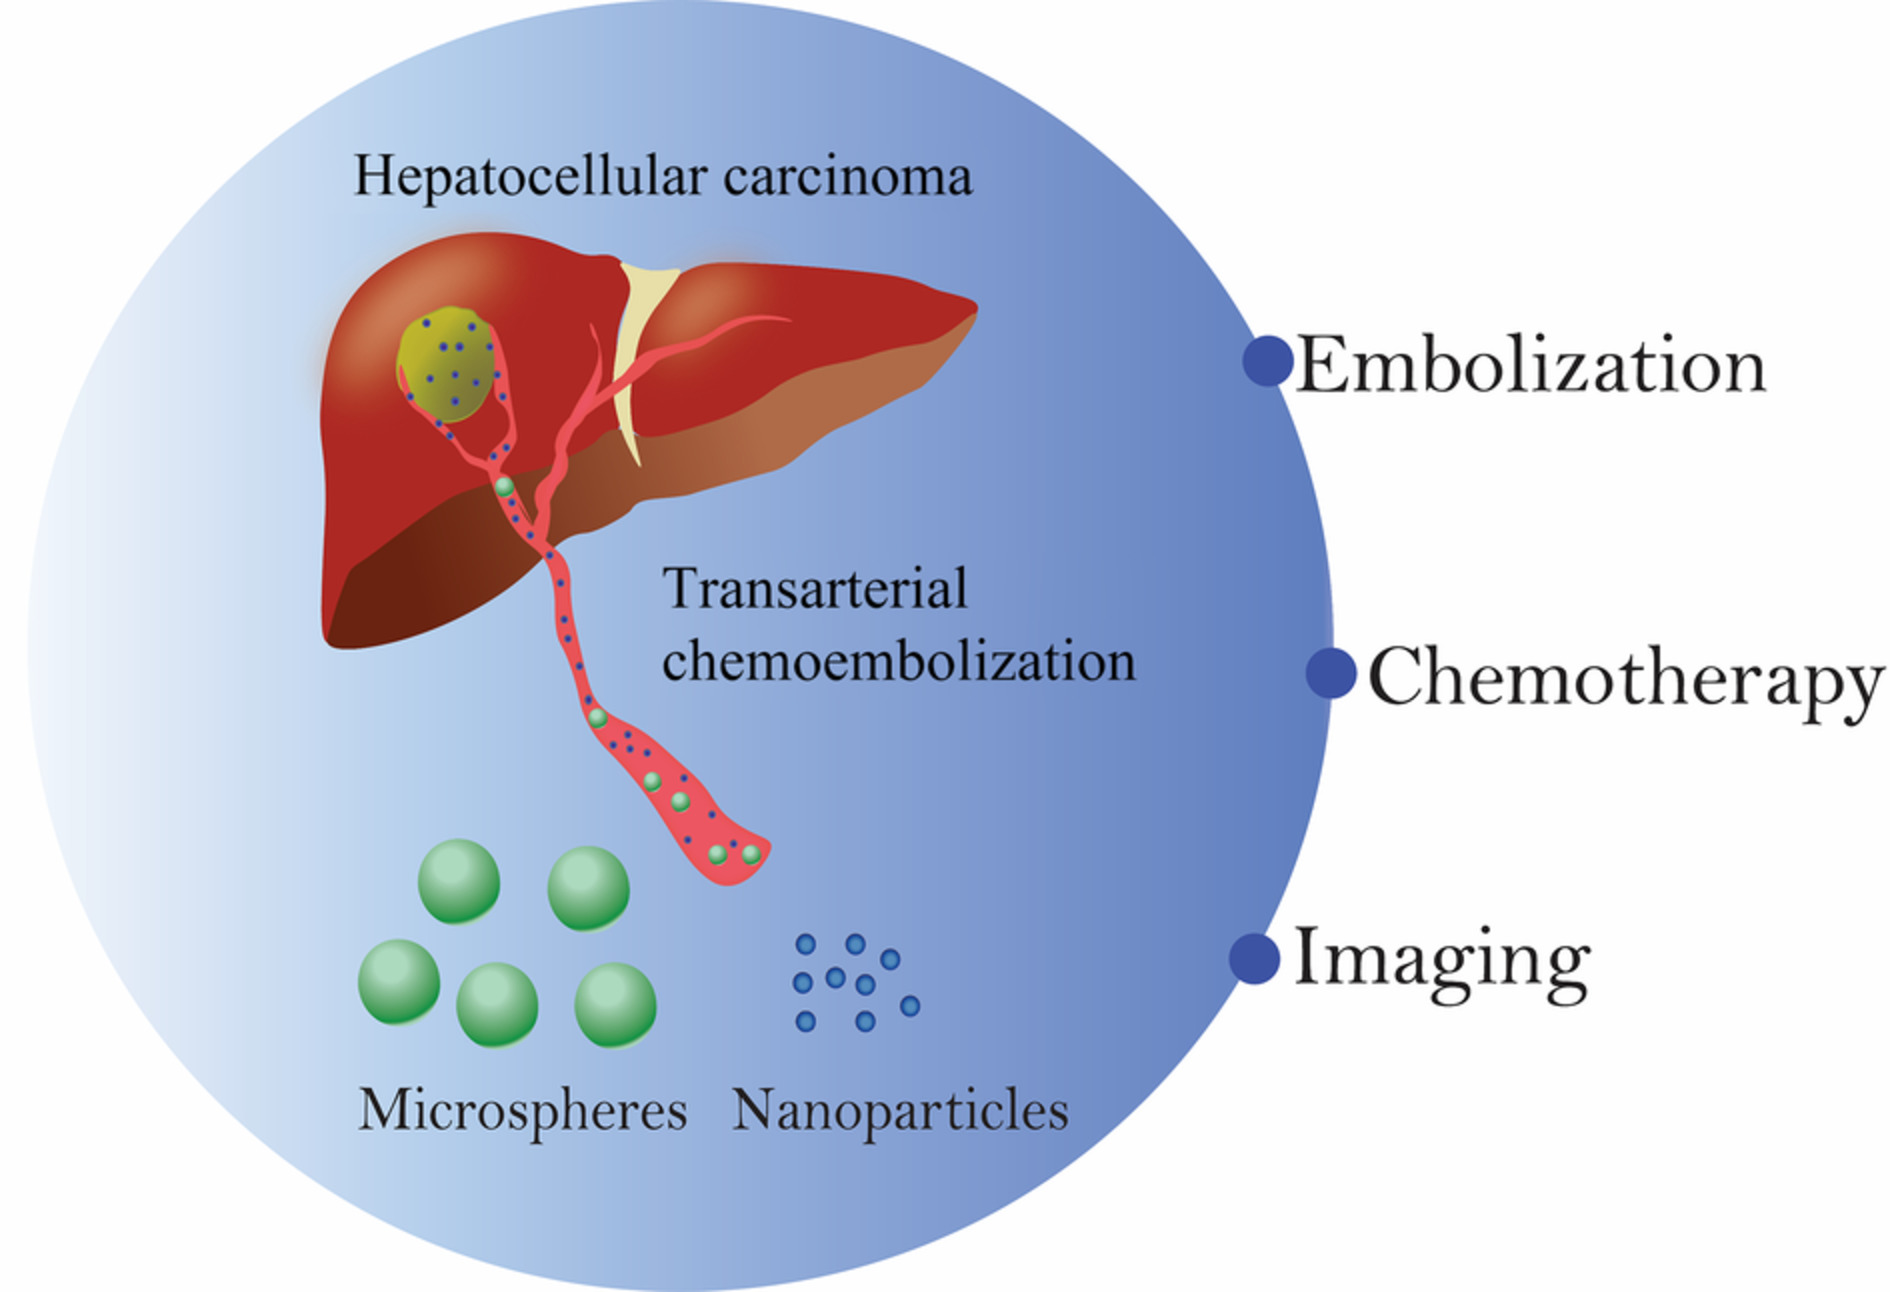 Recent advances and applications of microspheres and nanoparticles in transarterial chemoembolization for hepatocellular carcinoma